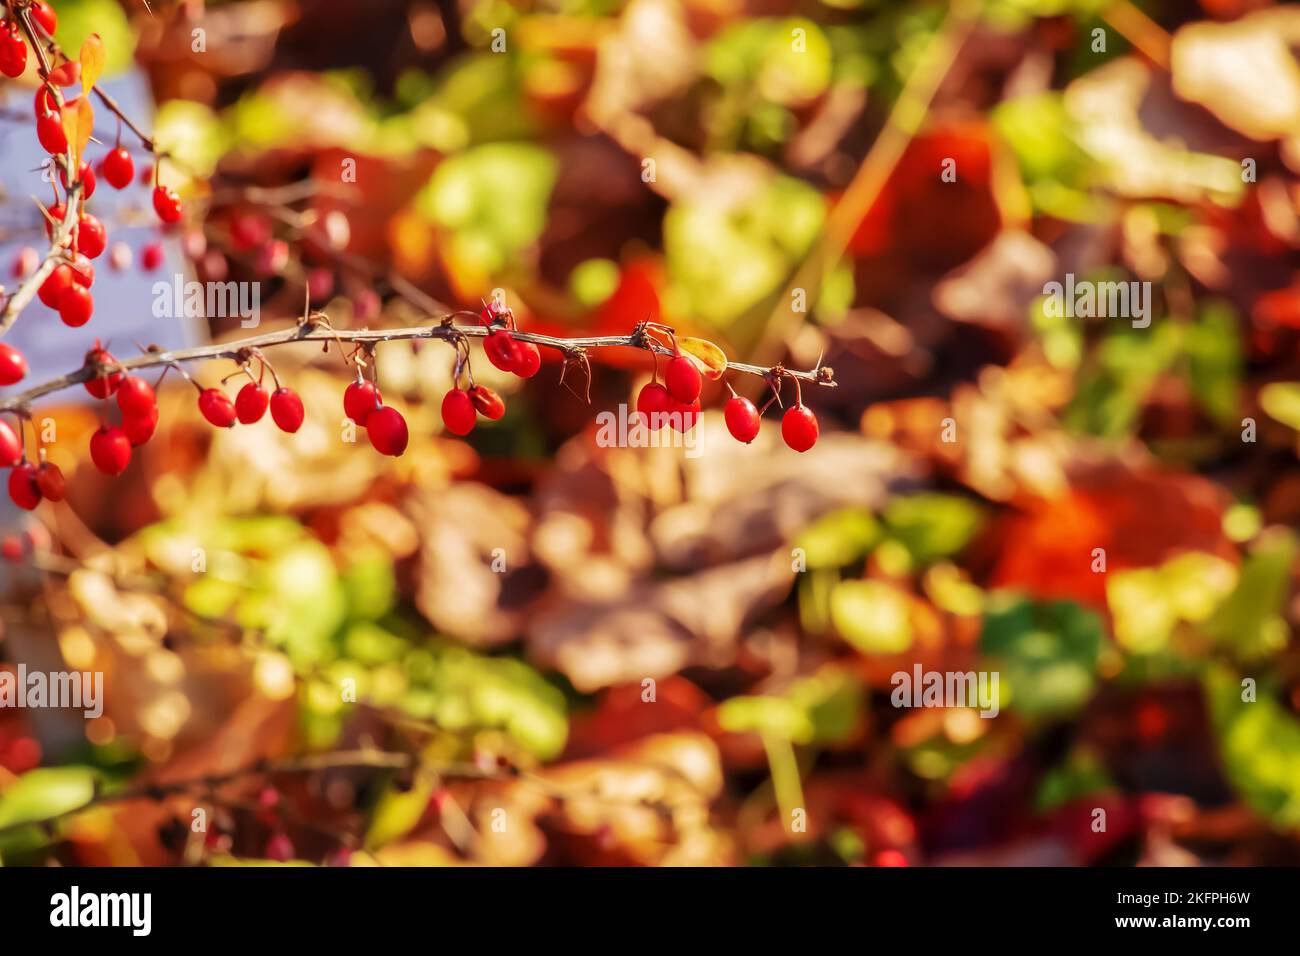 Red fruits of barberry on a branch in the autumn garden, close-up. Ripe Berberis sibirica berries are ready for harvest. Stock Photo